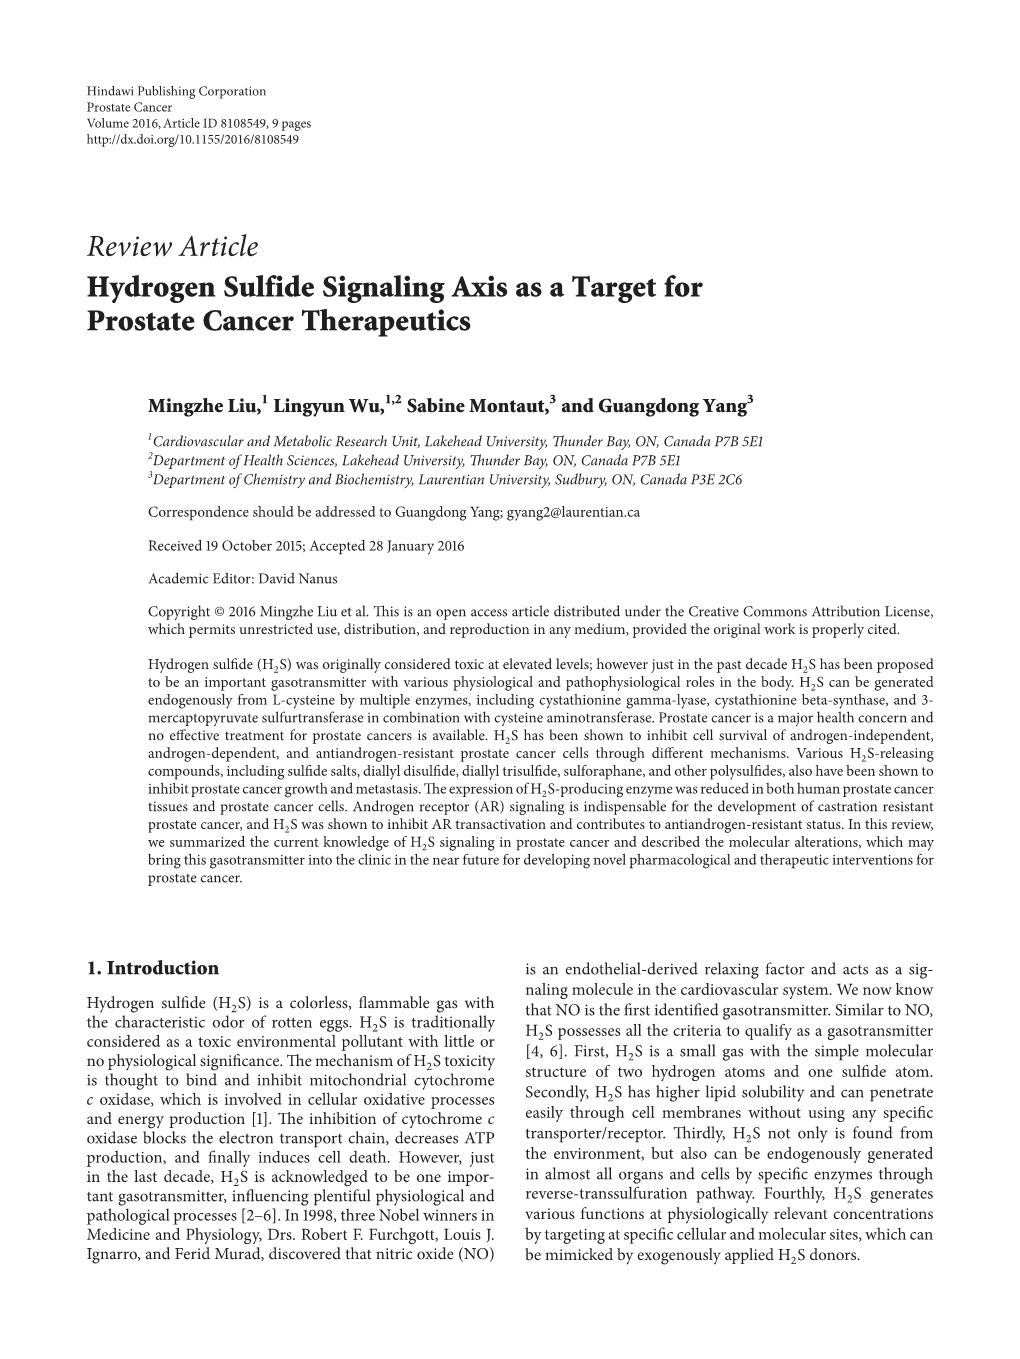 Review Article Hydrogen Sulfide Signaling Axis As a Target for Prostate Cancer Therapeutics